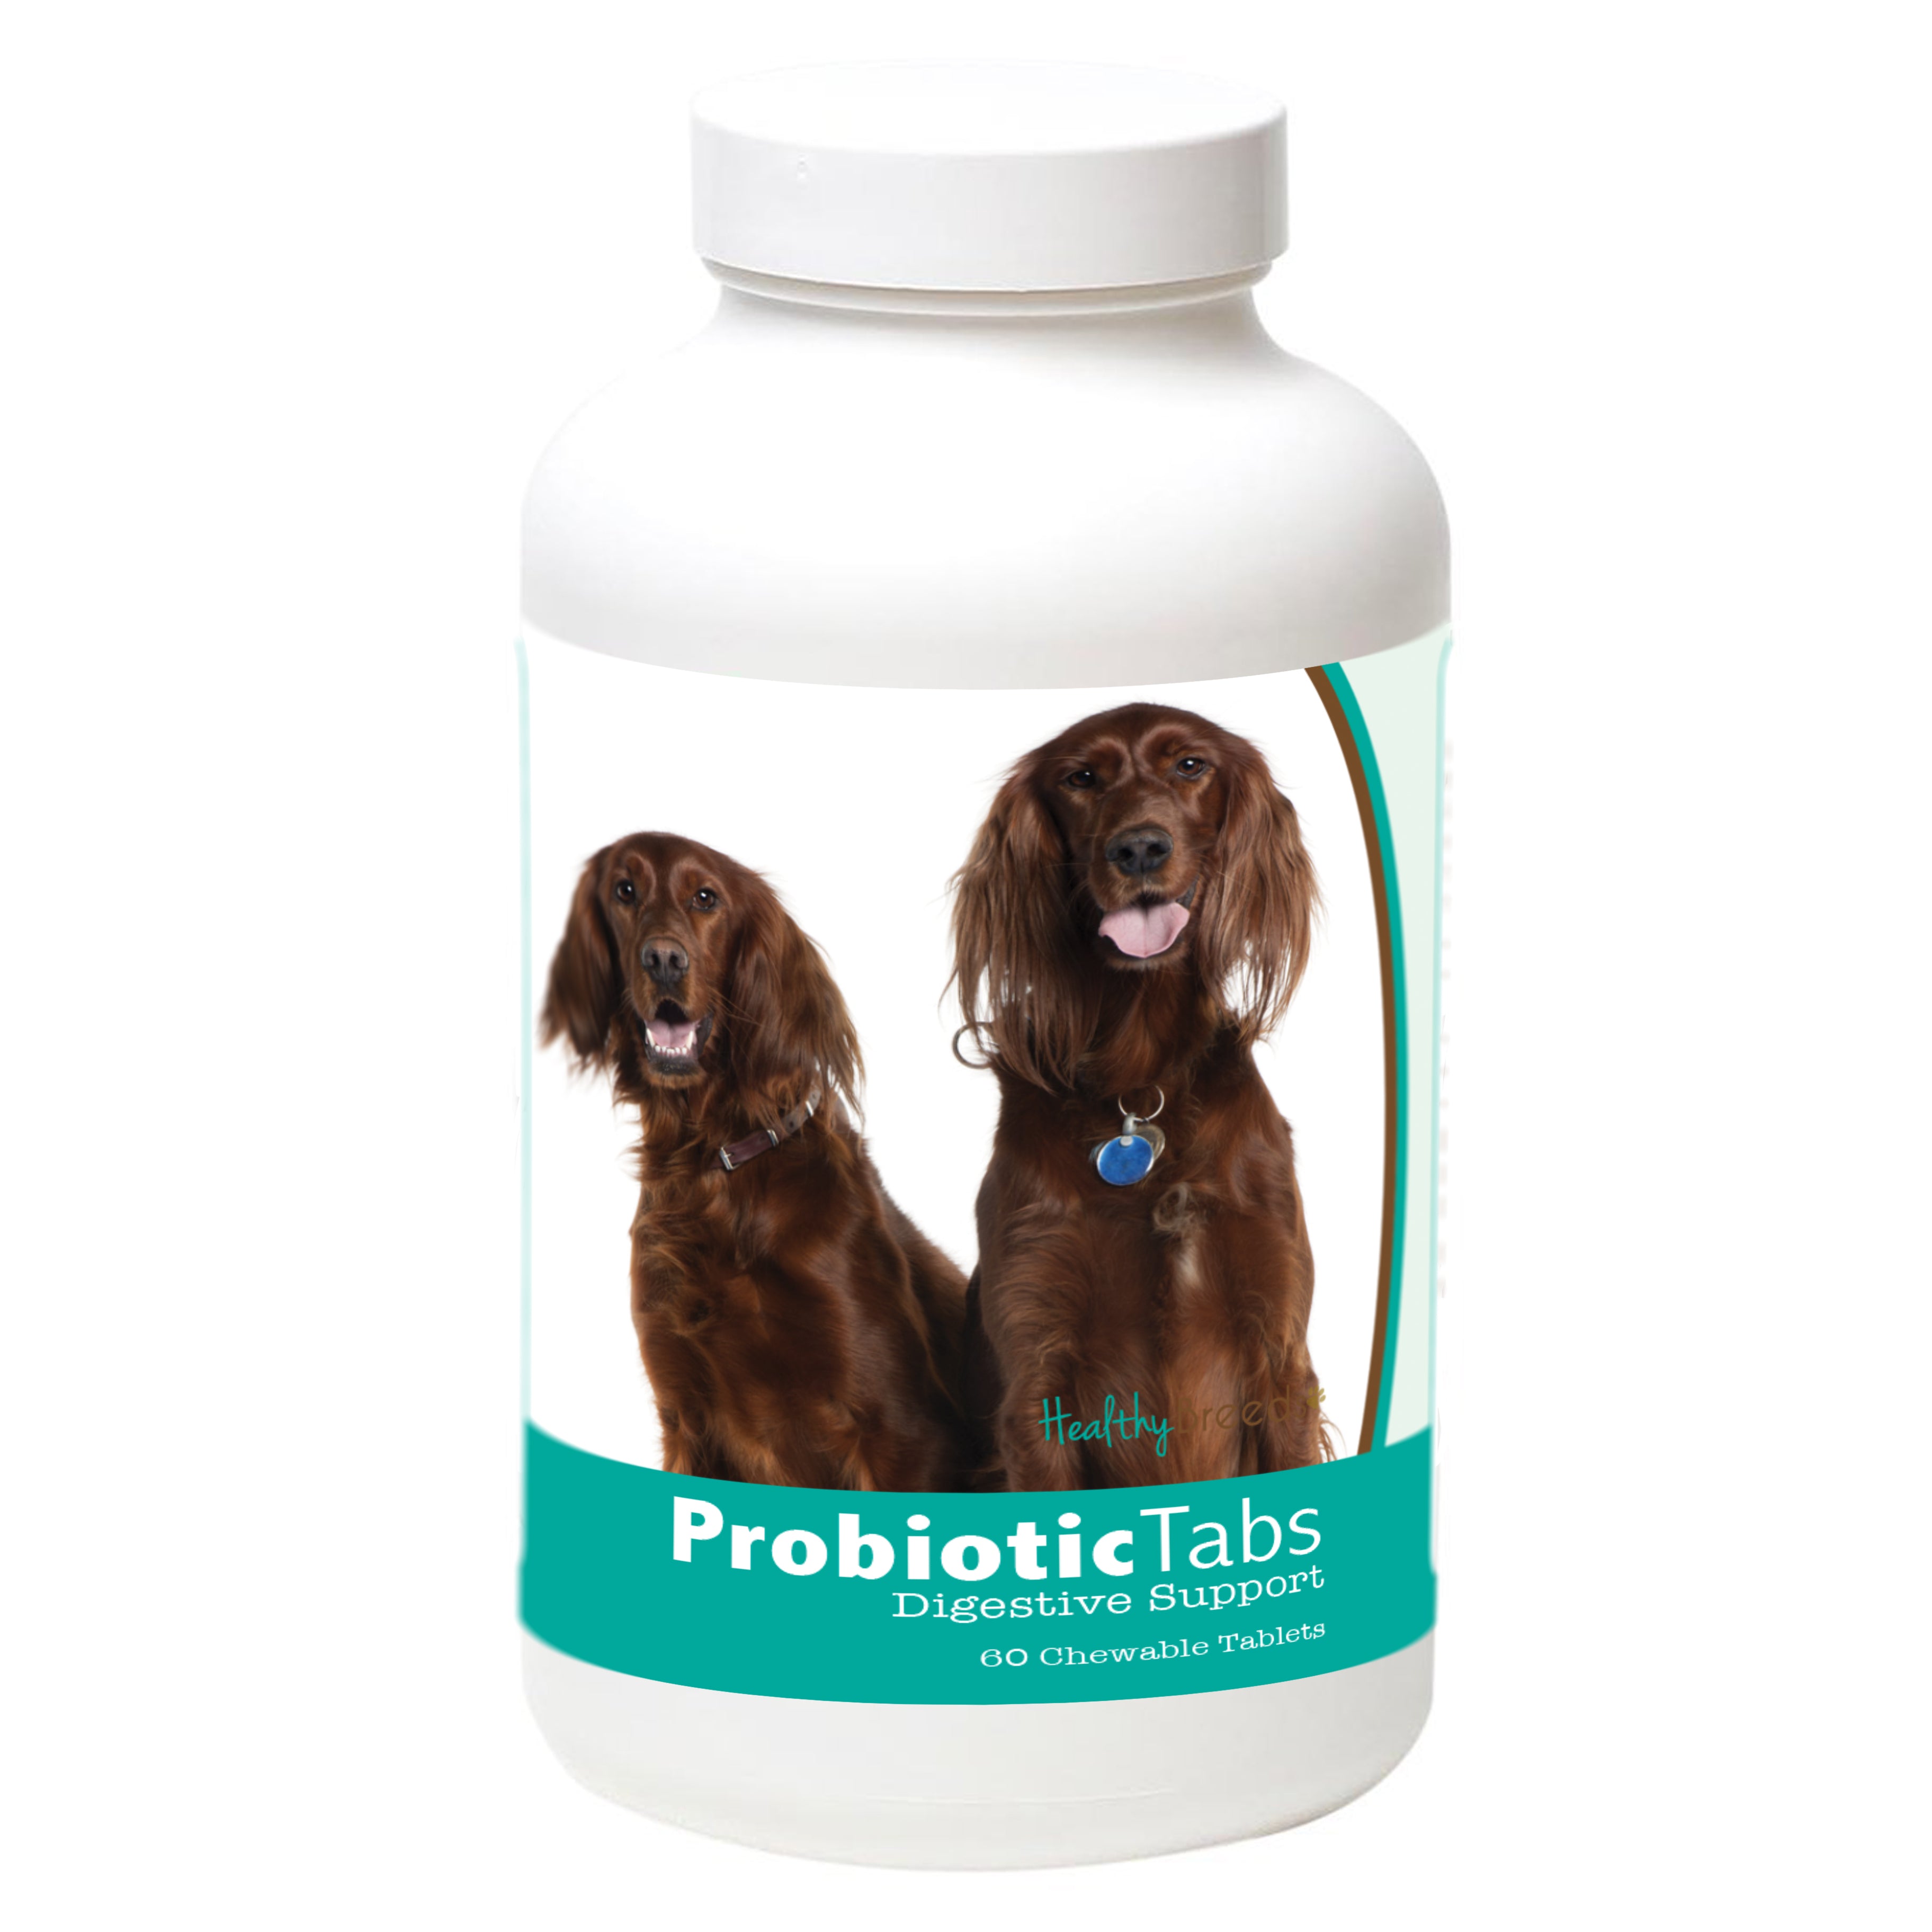 Irish Setter Probiotic and Digestive Support for Dogs 60 Count